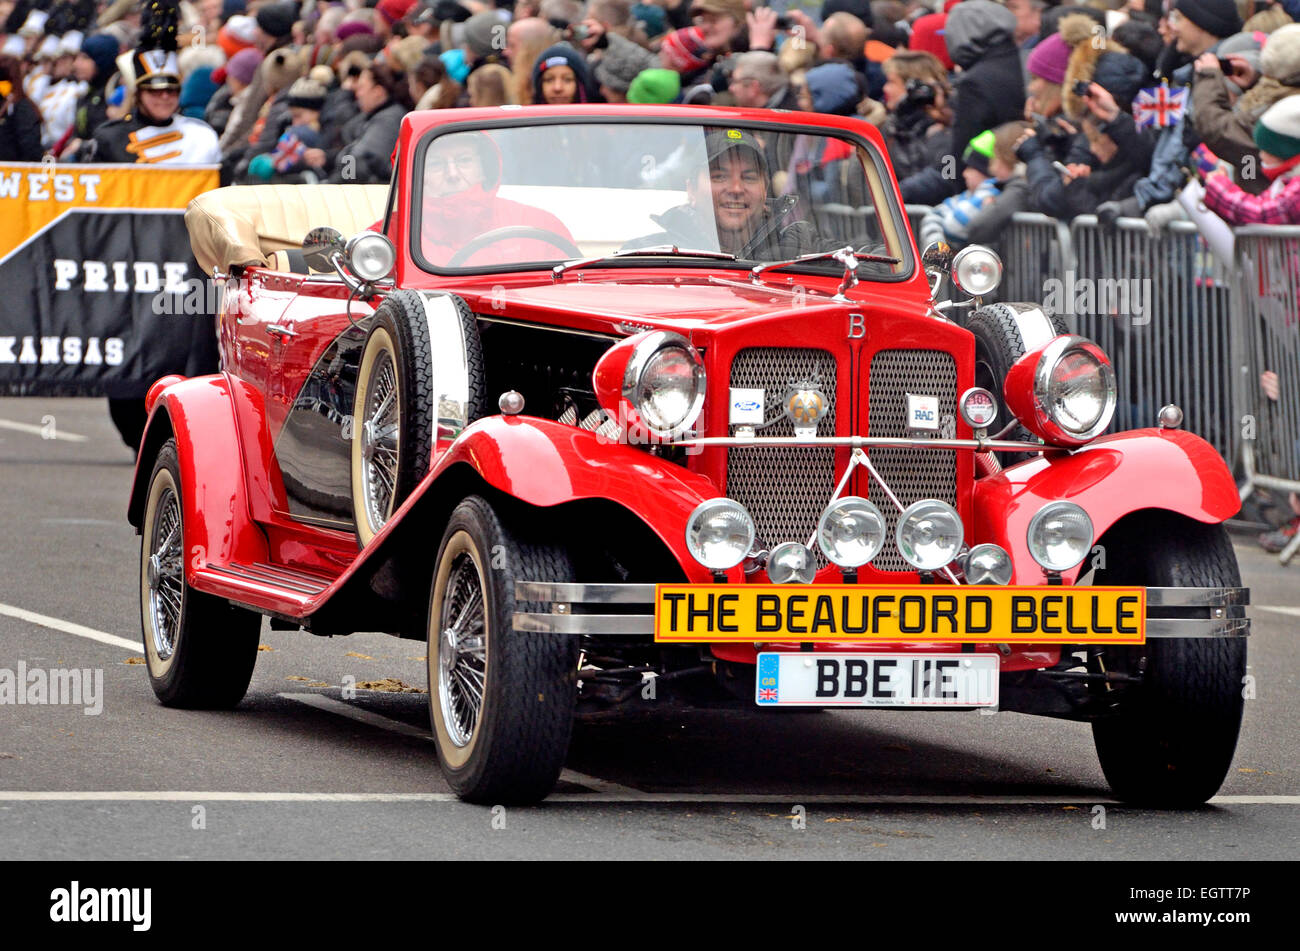 London, 1. Januar. New Year's Day Parade von Piccadilly, Parliament Square - Beauford Belle (BBE IIE) gebaut 1970 Stockfoto